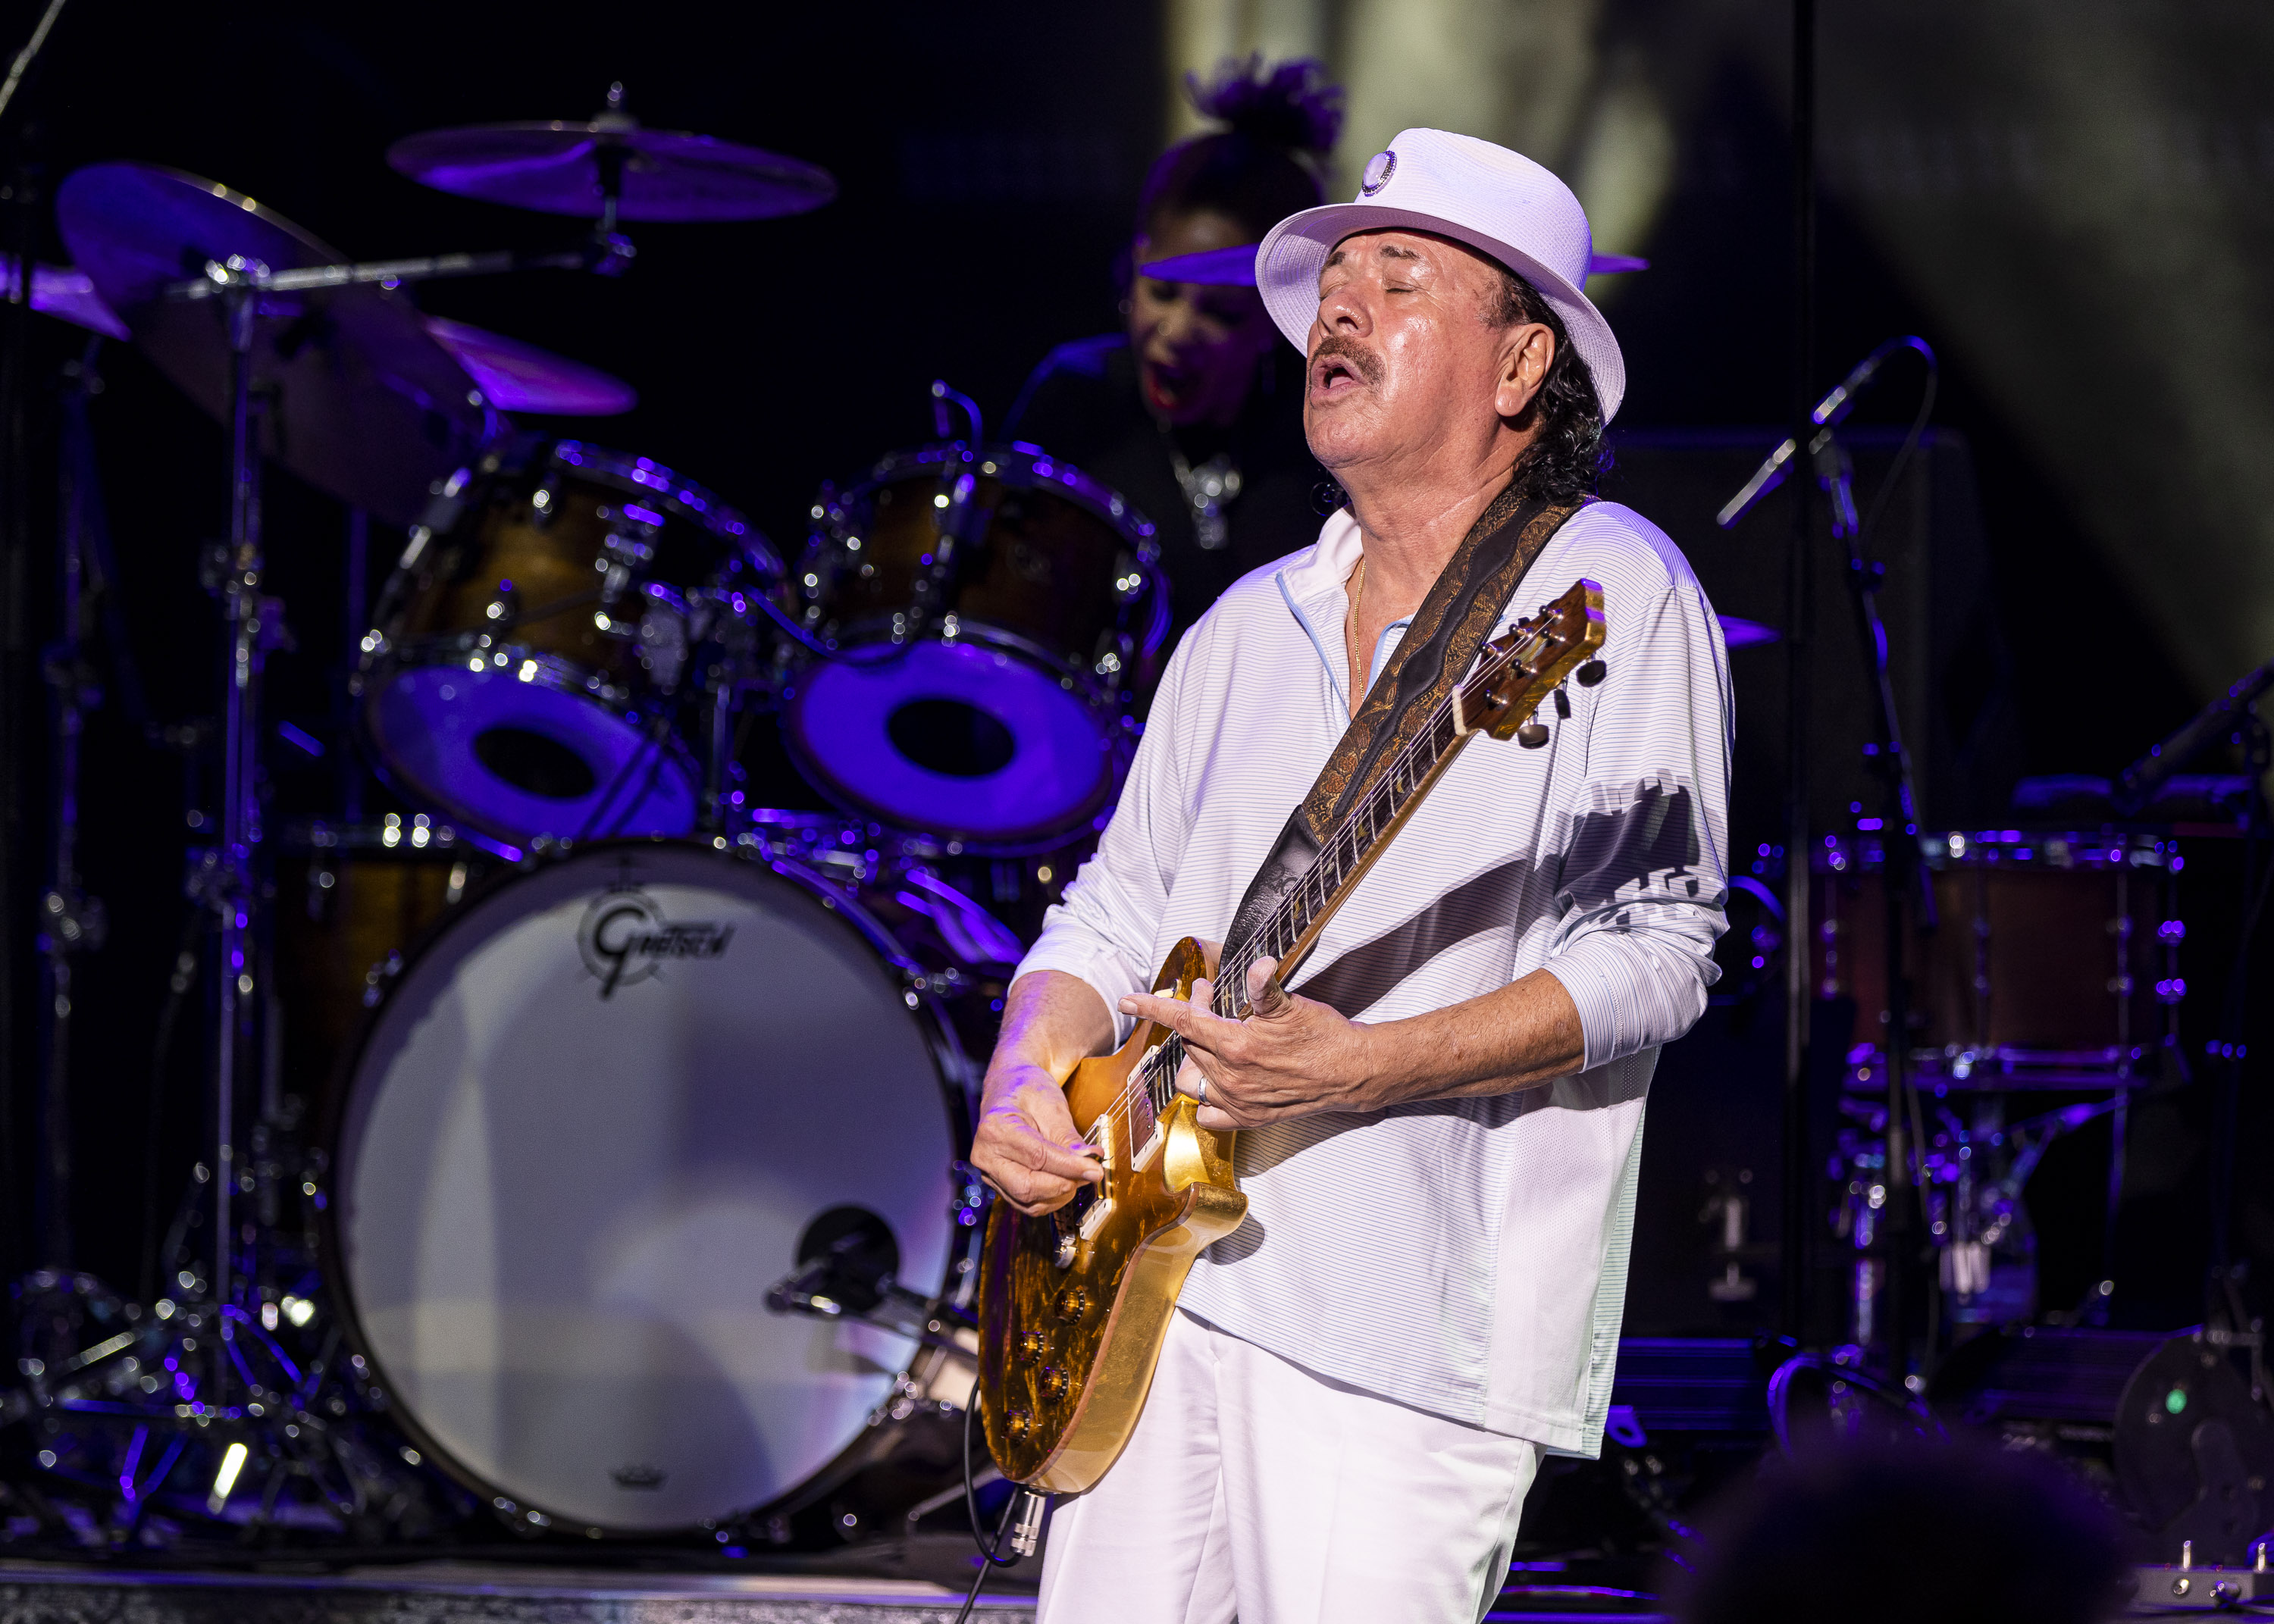 Carlos Santana returning to Pine Knob for concert 1 year after collapsing  on stage